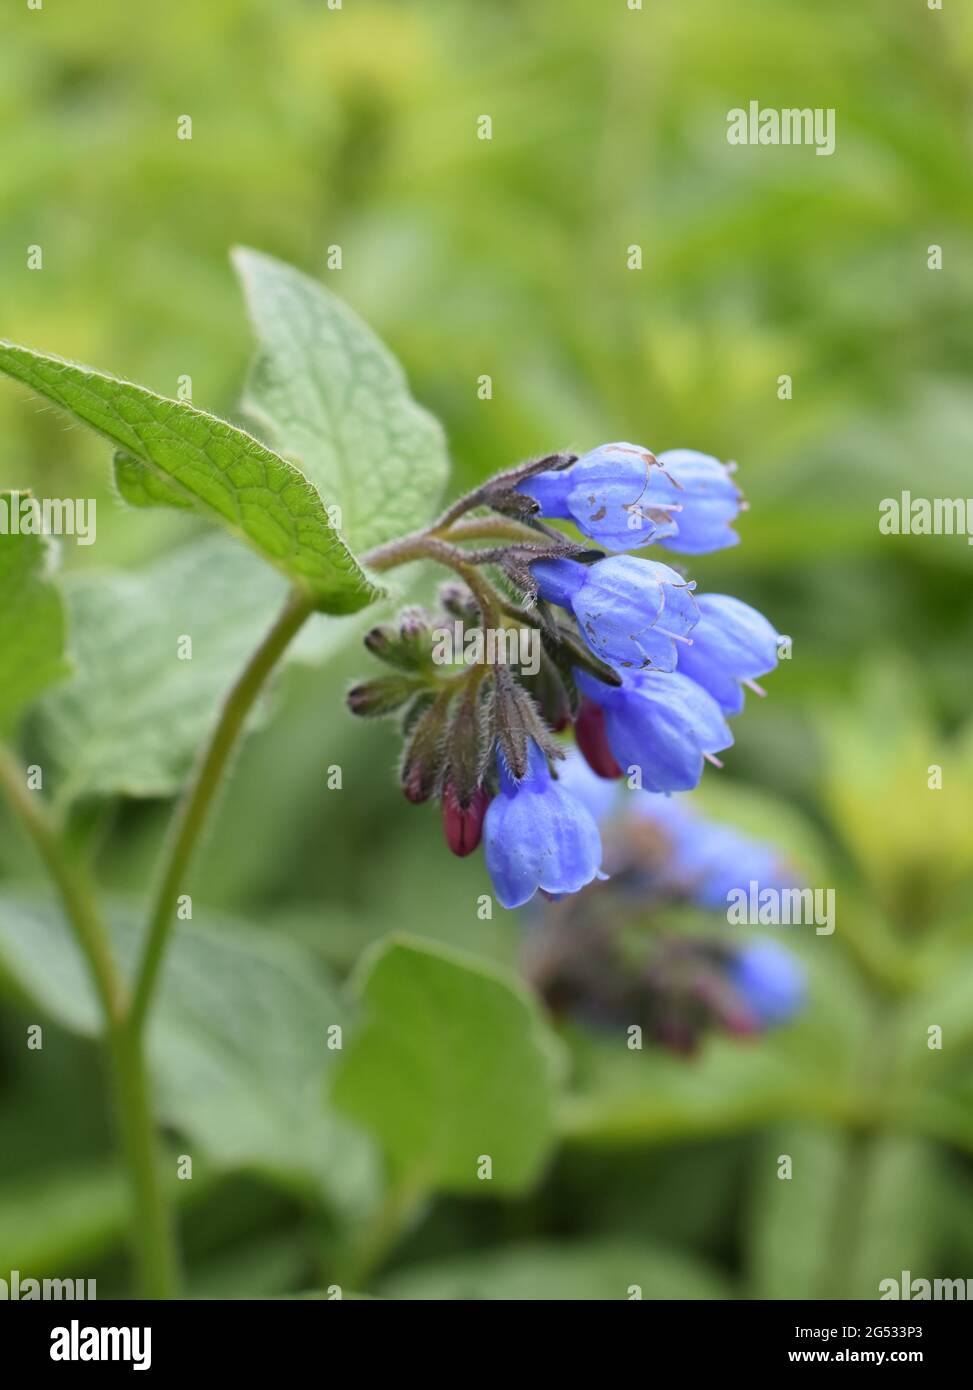 Common comfrey Symphytum officinale herb with blue flowers Stock Photo